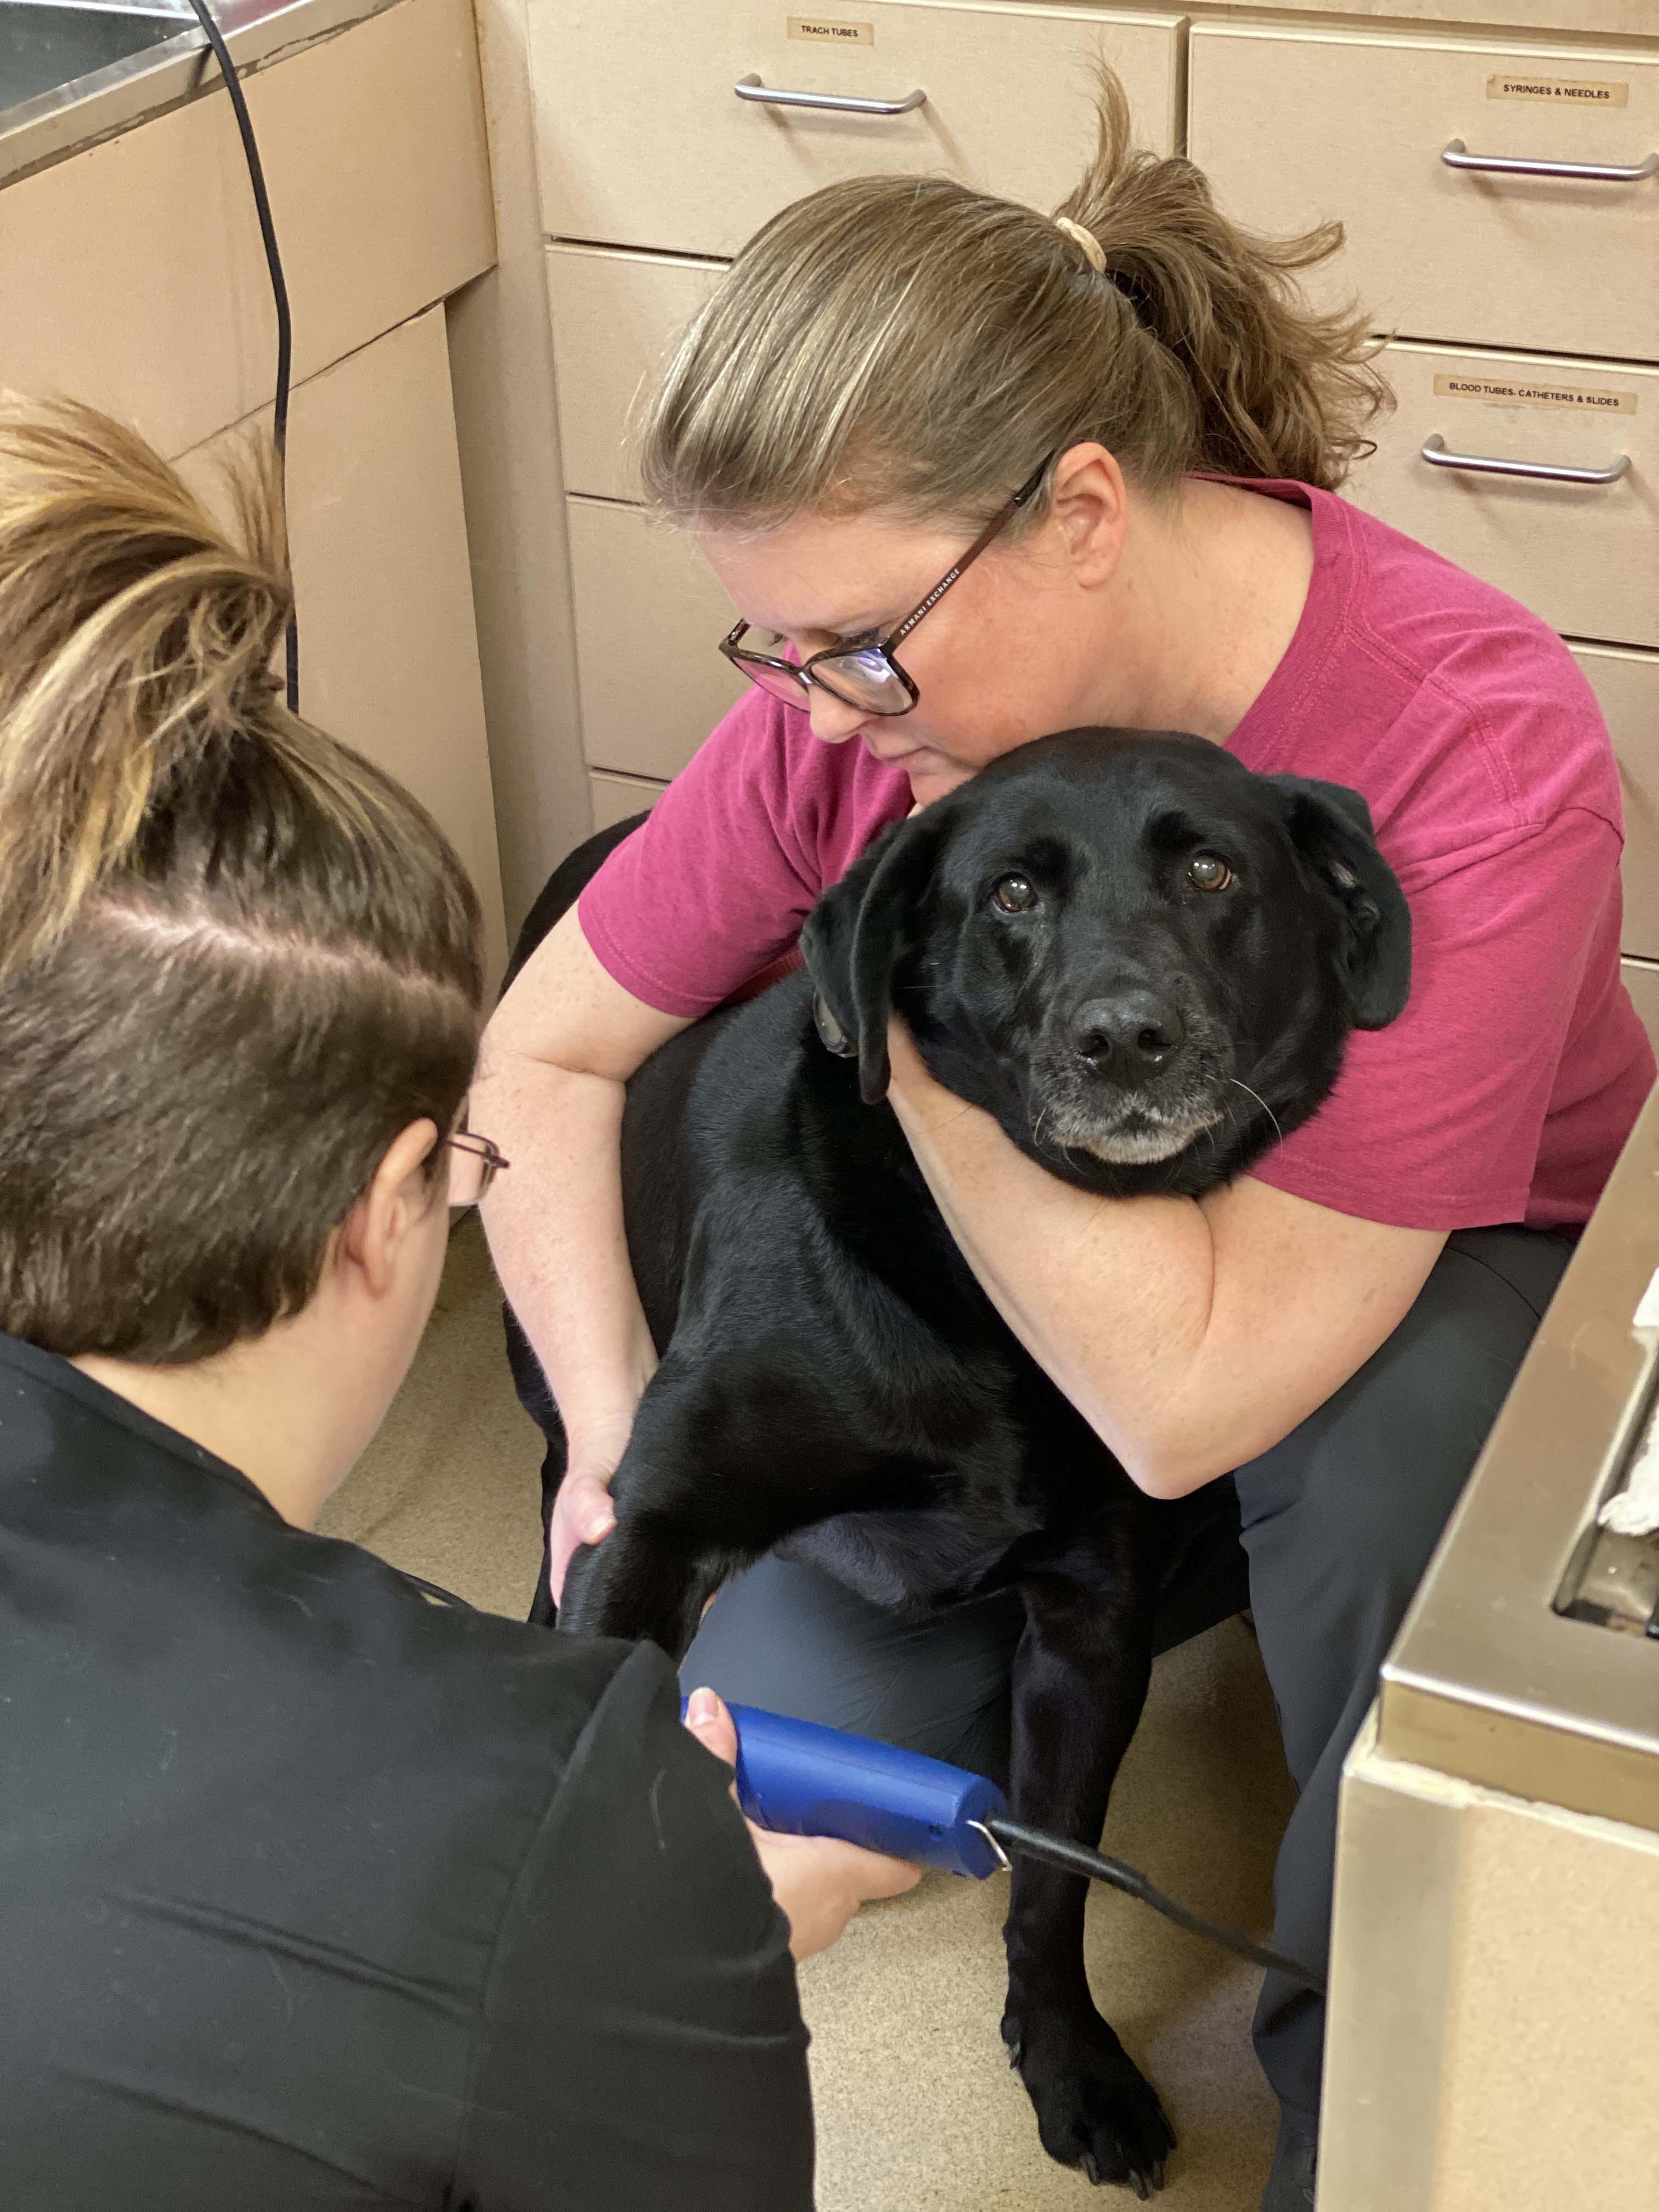 We handle each and every patient with the understanding that comes from years of veterinary experience and the gentleness that comes from a deep admiration for animals.